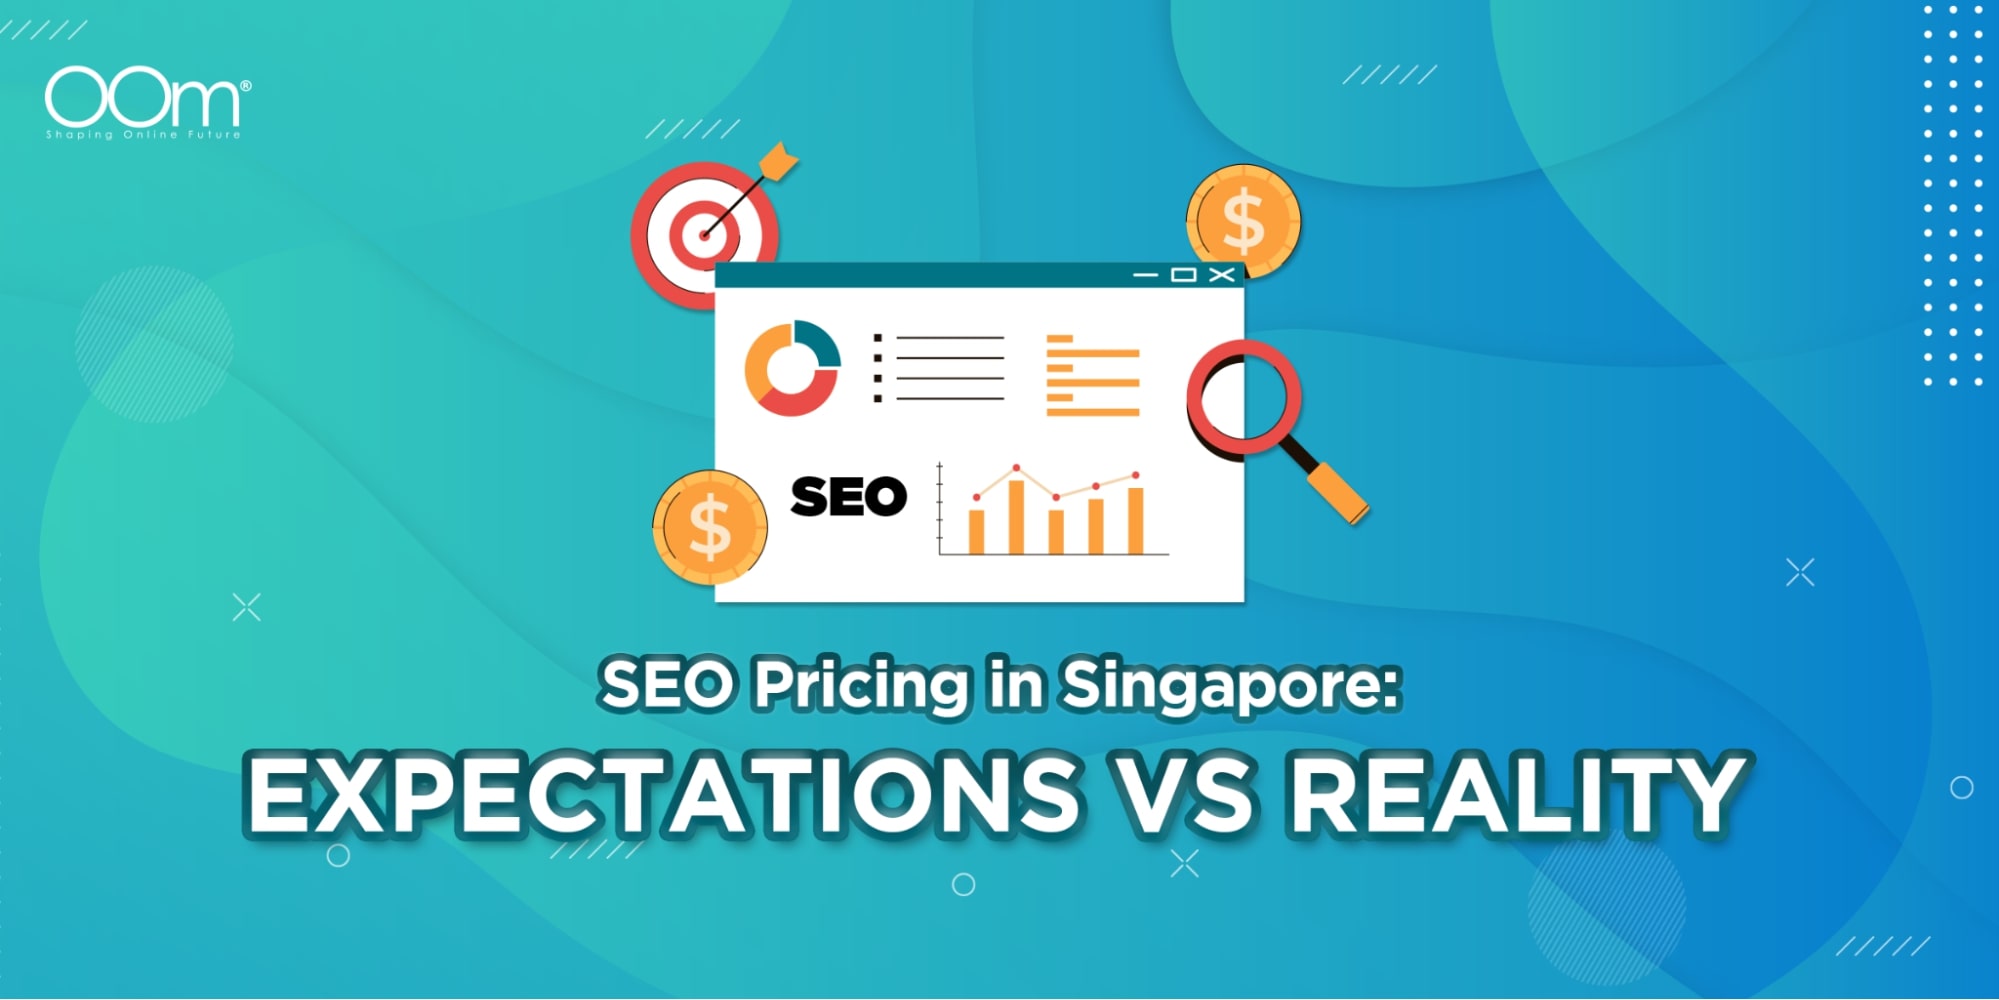 SEO Pricing in Singapore Expectations vs Reality